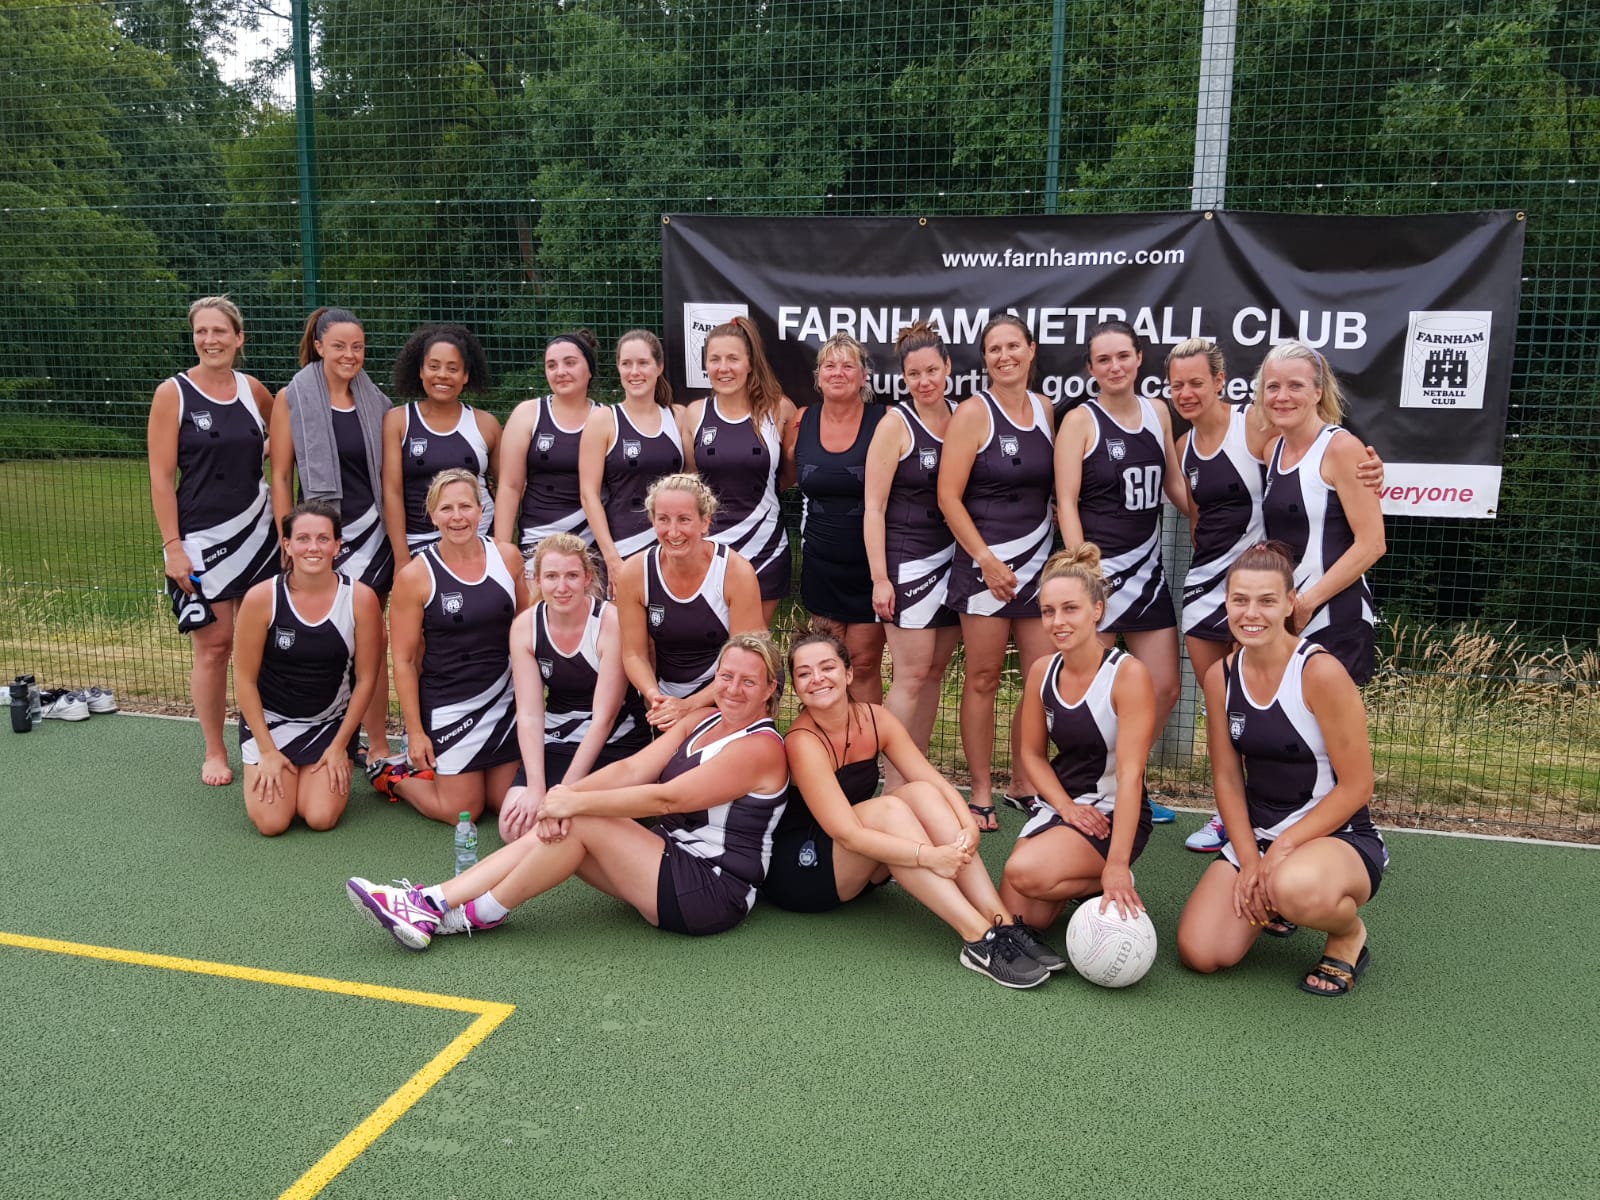 The Club Has 3 Squads Playing In Divisions 1 And 2 - Frensham Netball , HD Wallpaper & Backgrounds